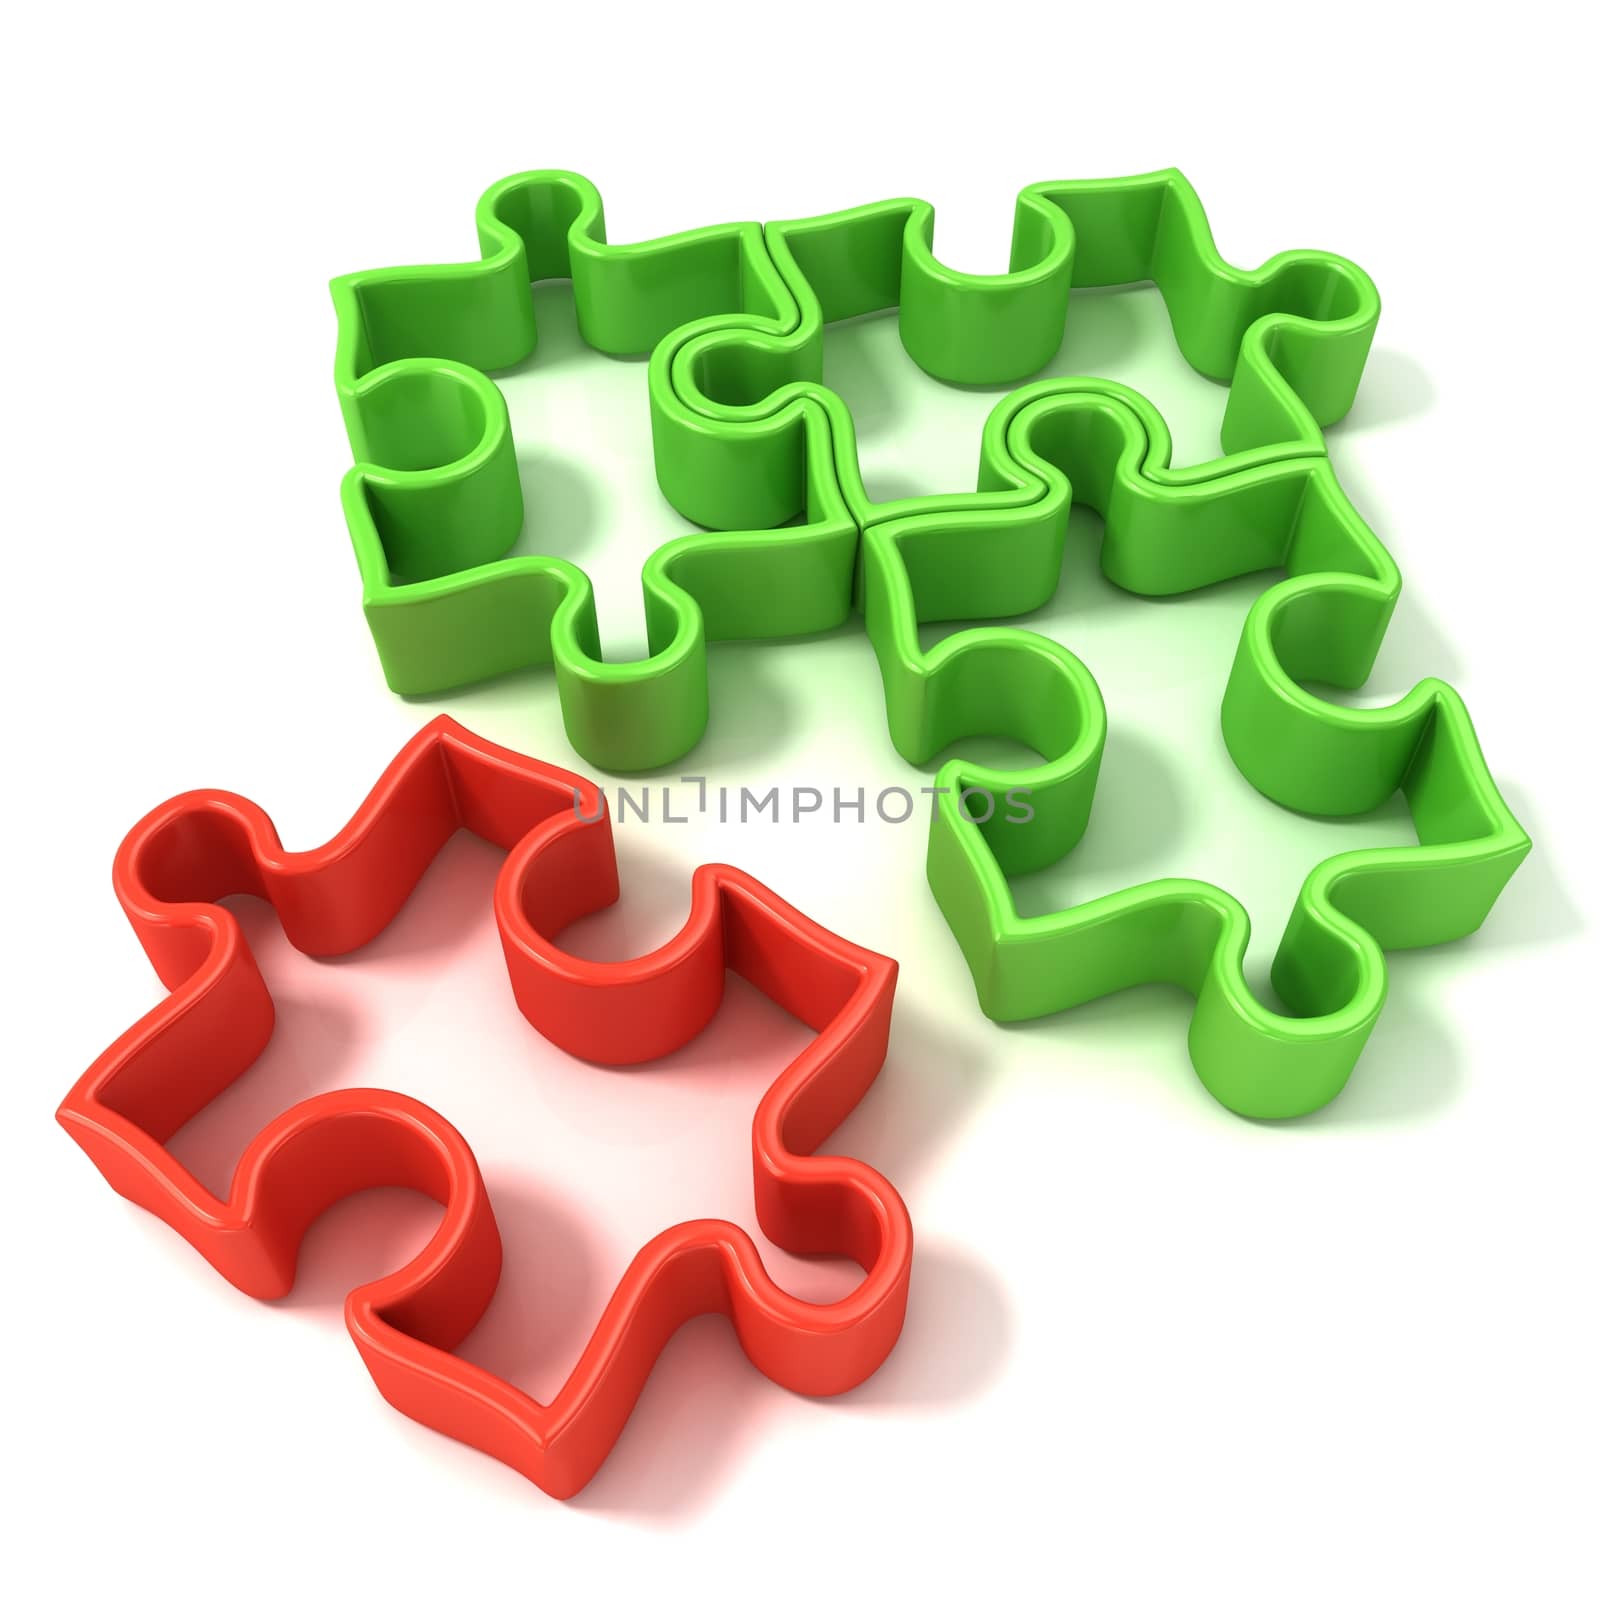 Four jigsaw puzzle outlined pieces by djmilic